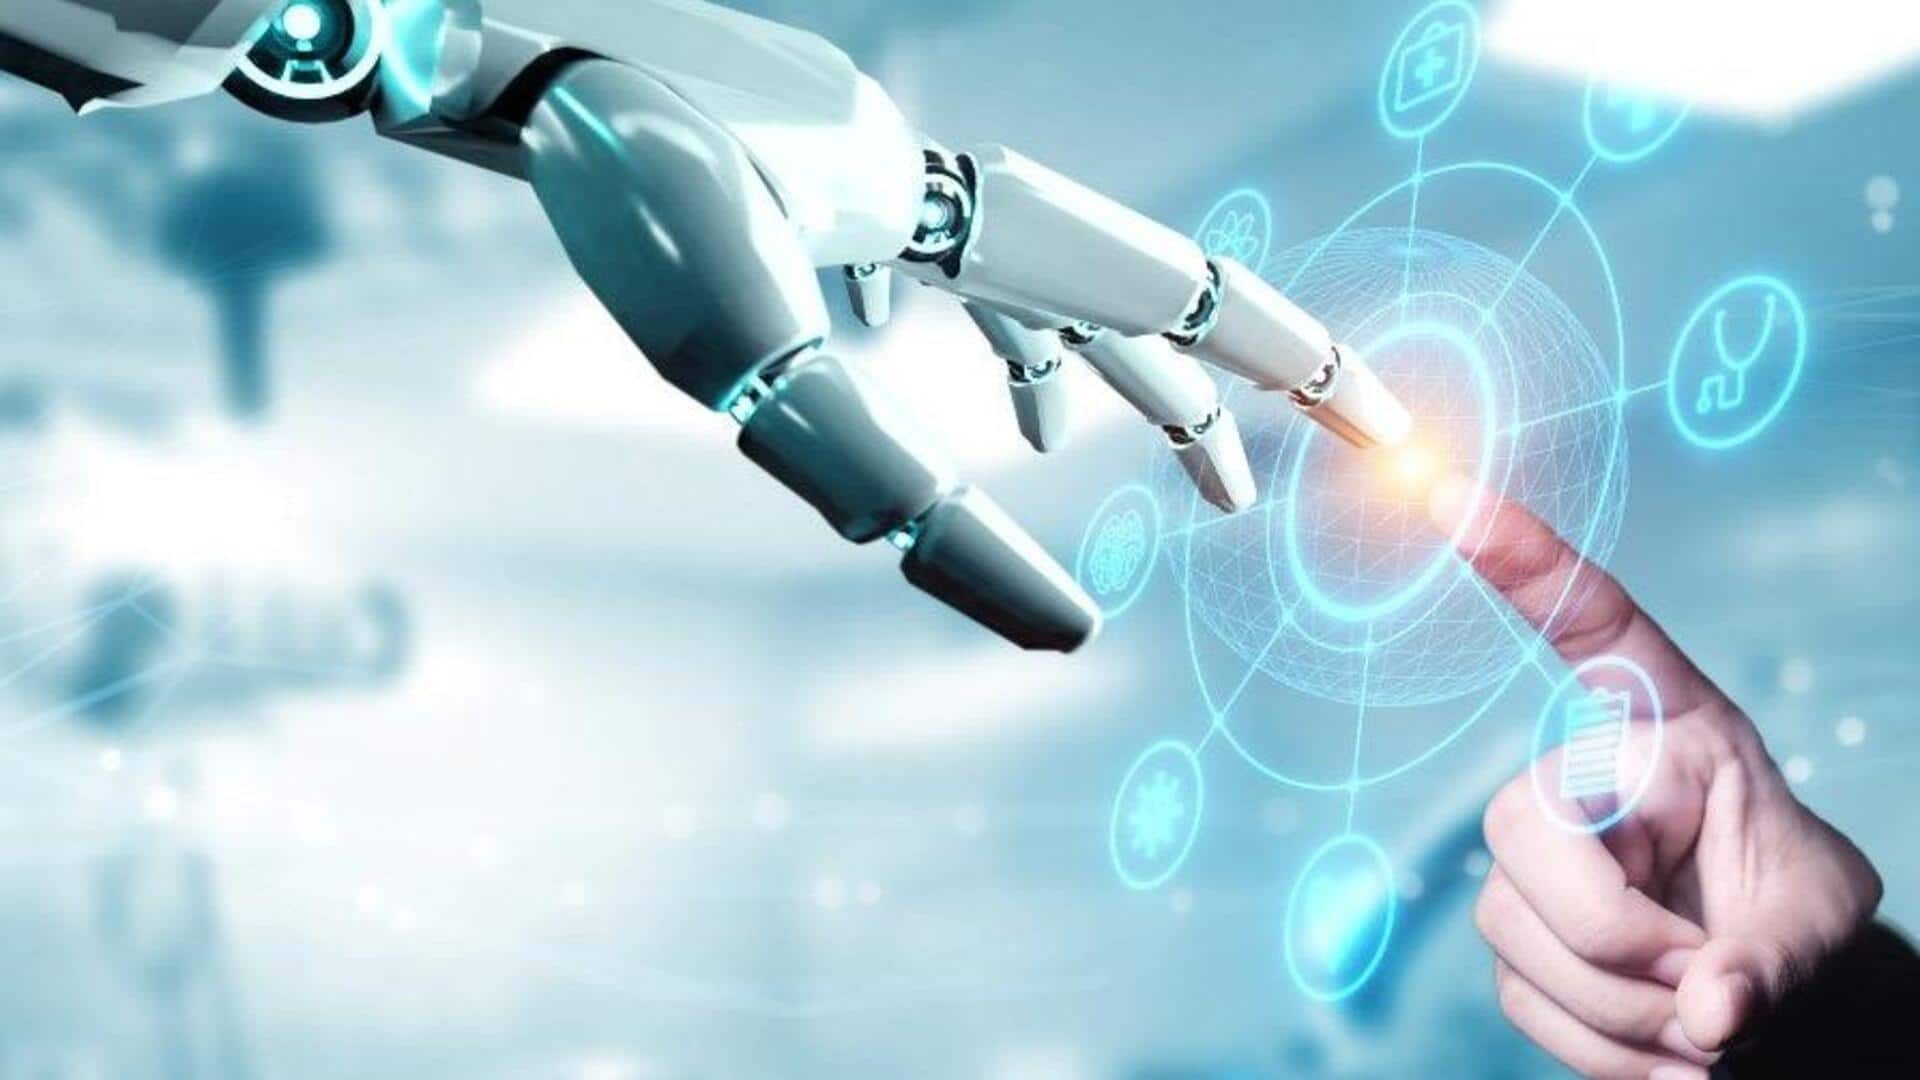 Germany, France, Italy finalize agreement on AI regulations: Report